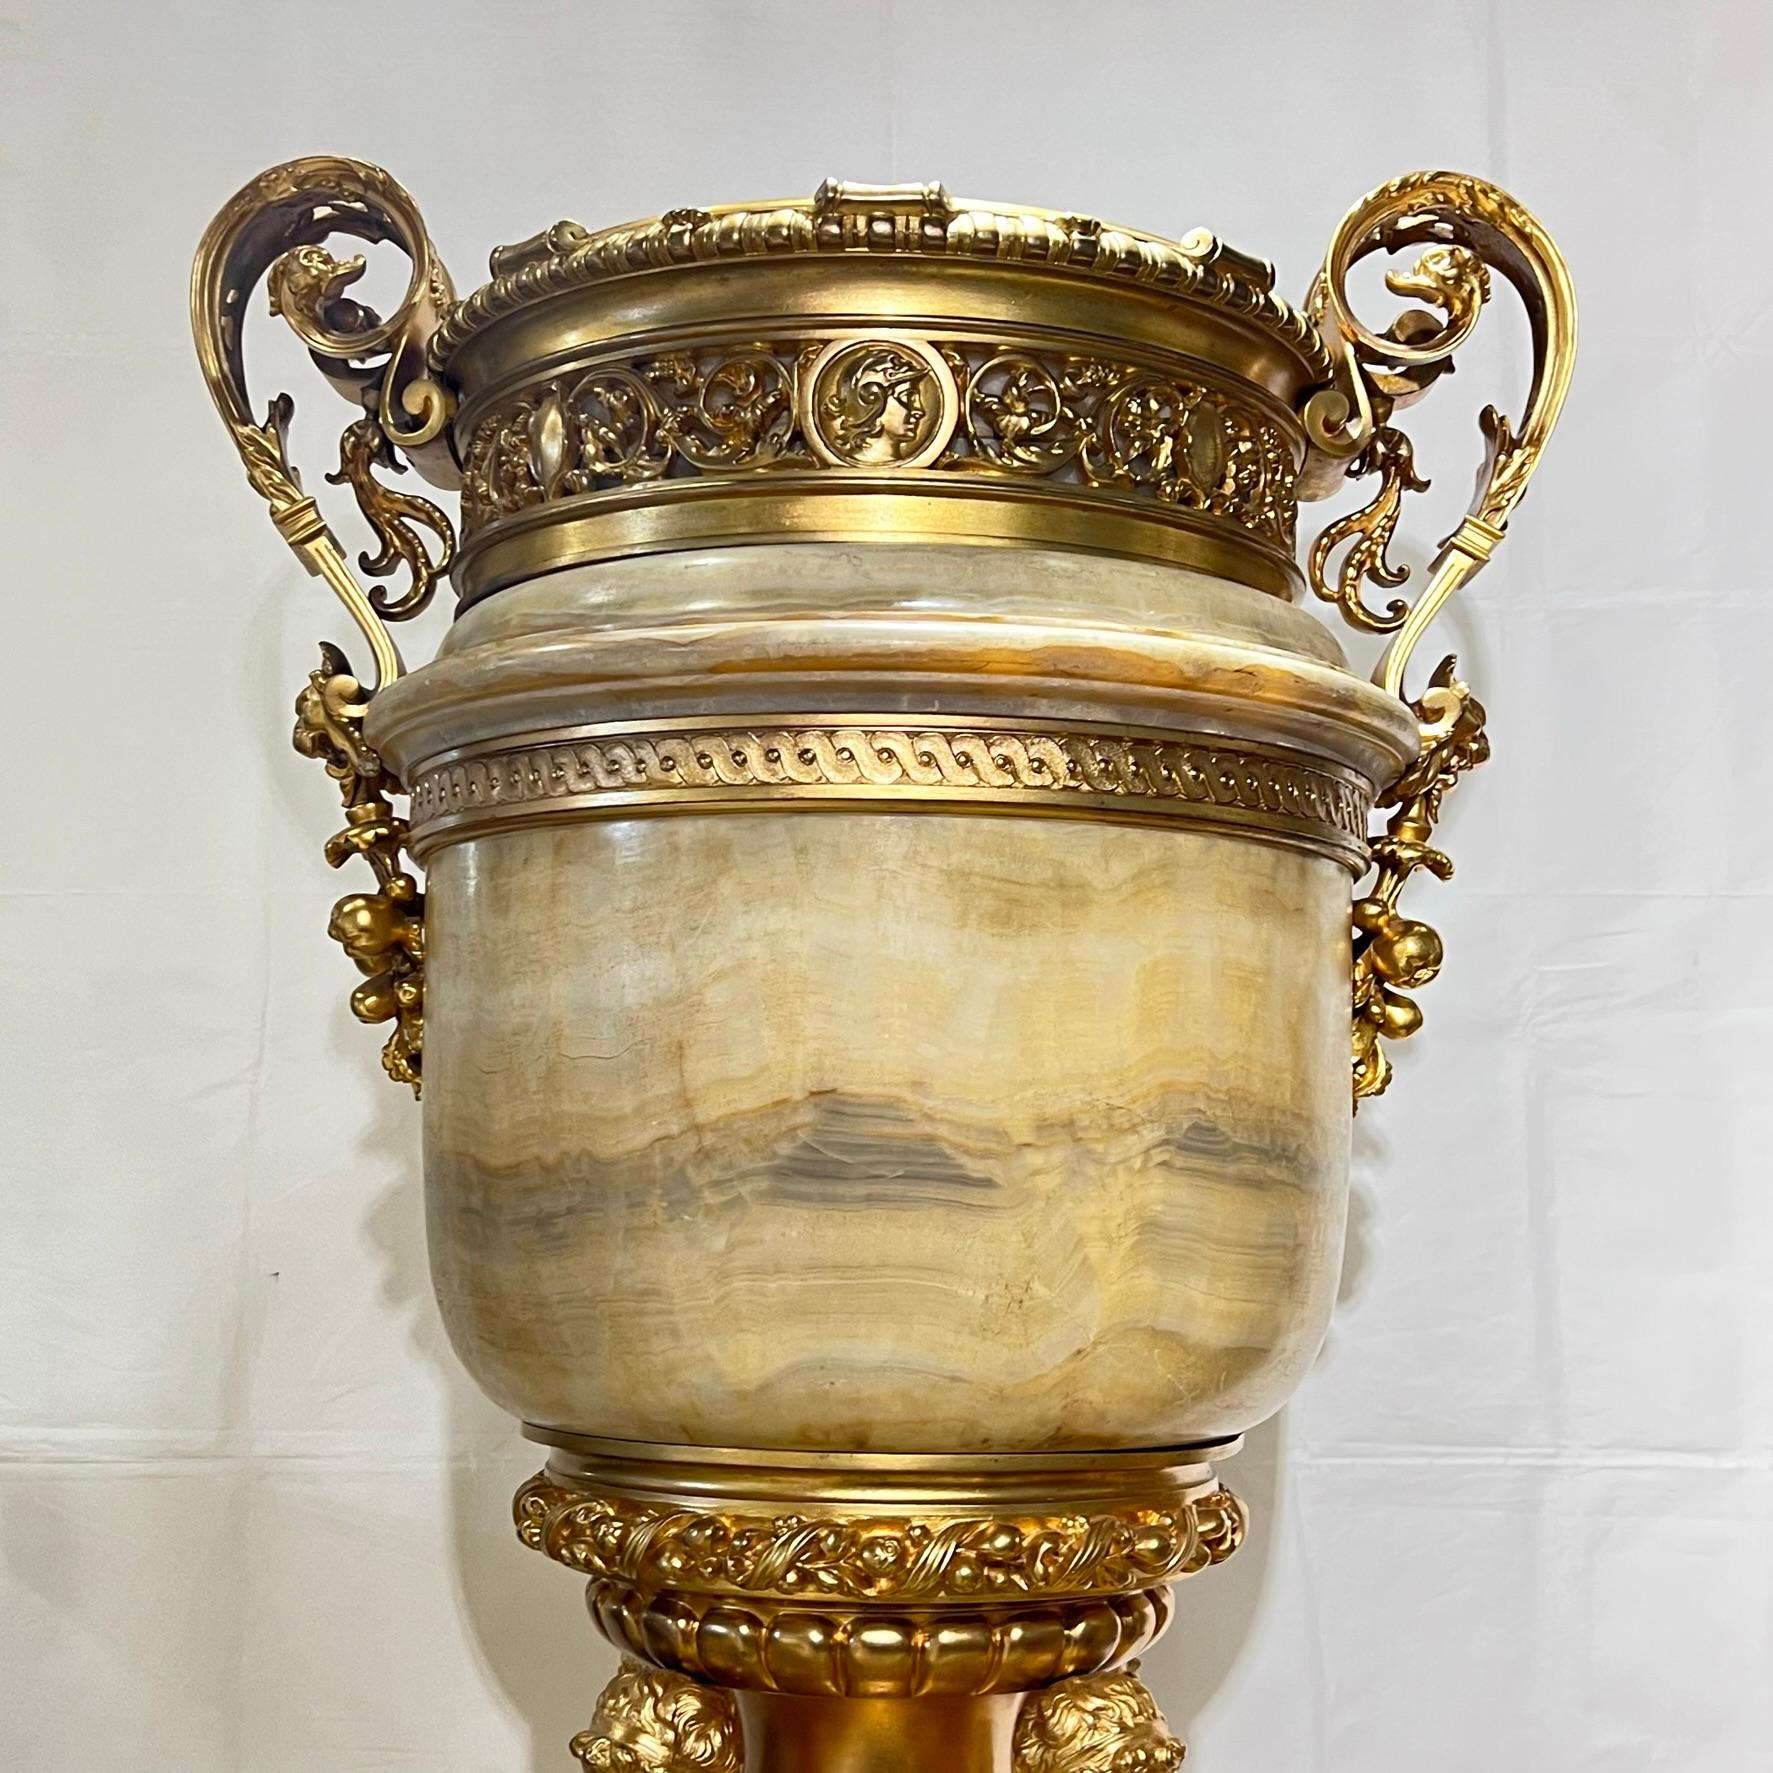 Monumental 19th Century French Neoclassical Onyx and Gilt Bronze Vase In Good Condition For Sale In New York, NY